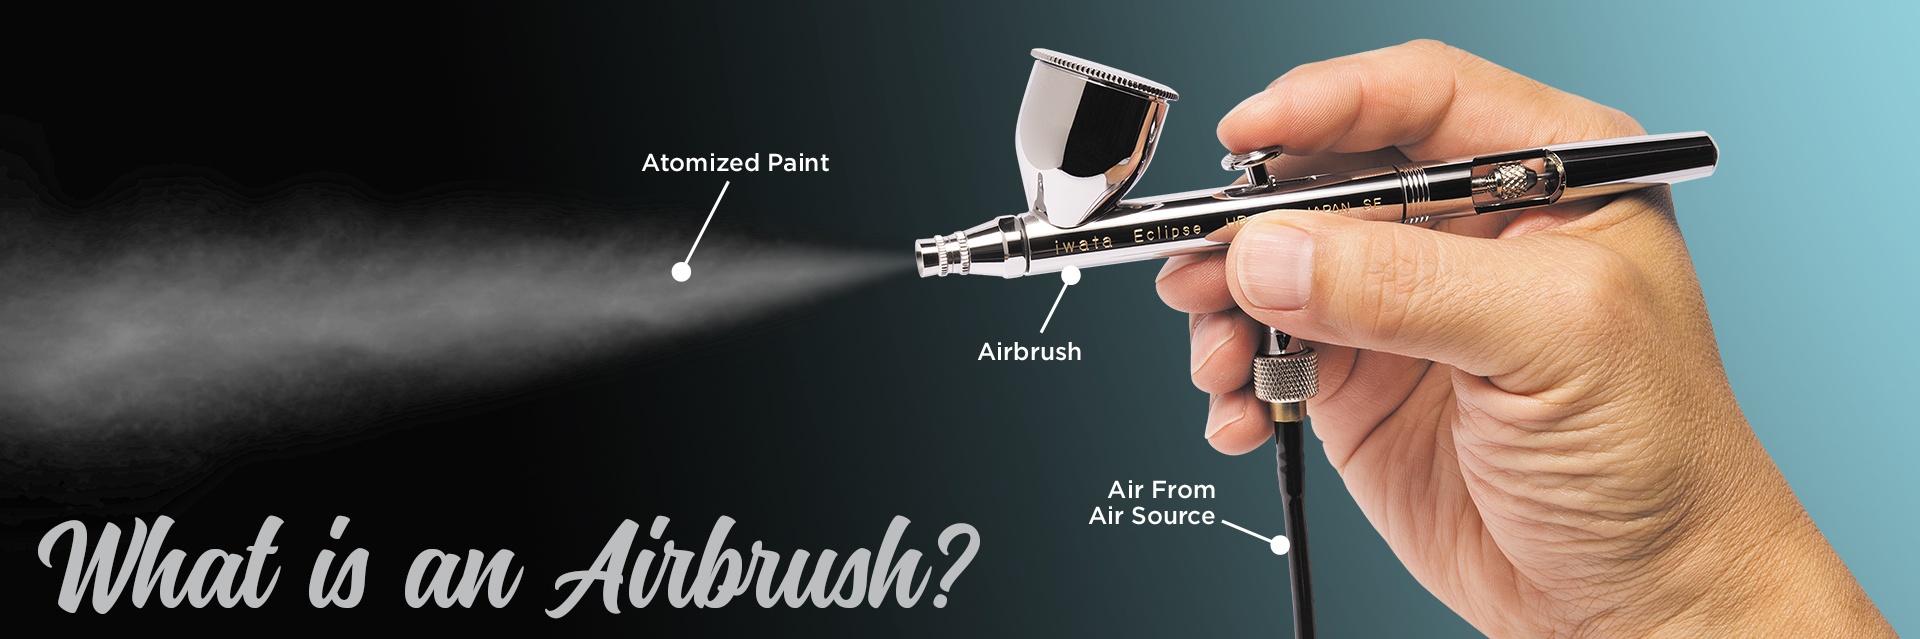 Testing the CHEAPEST airbrush KIT I could find. AWESOME Timbertech Airbrush  KIT 